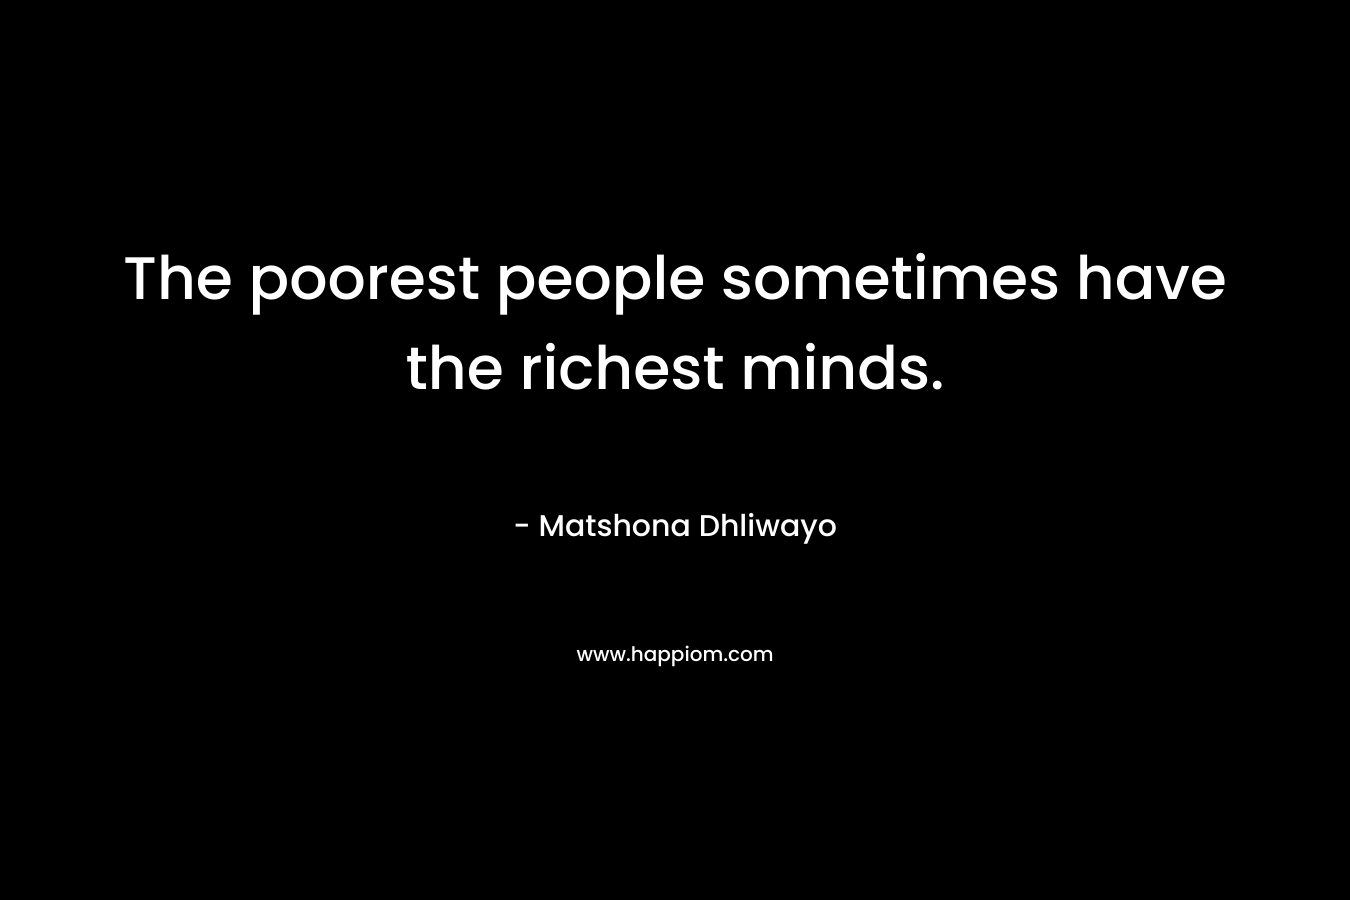 The poorest people sometimes have the richest minds. – Matshona Dhliwayo